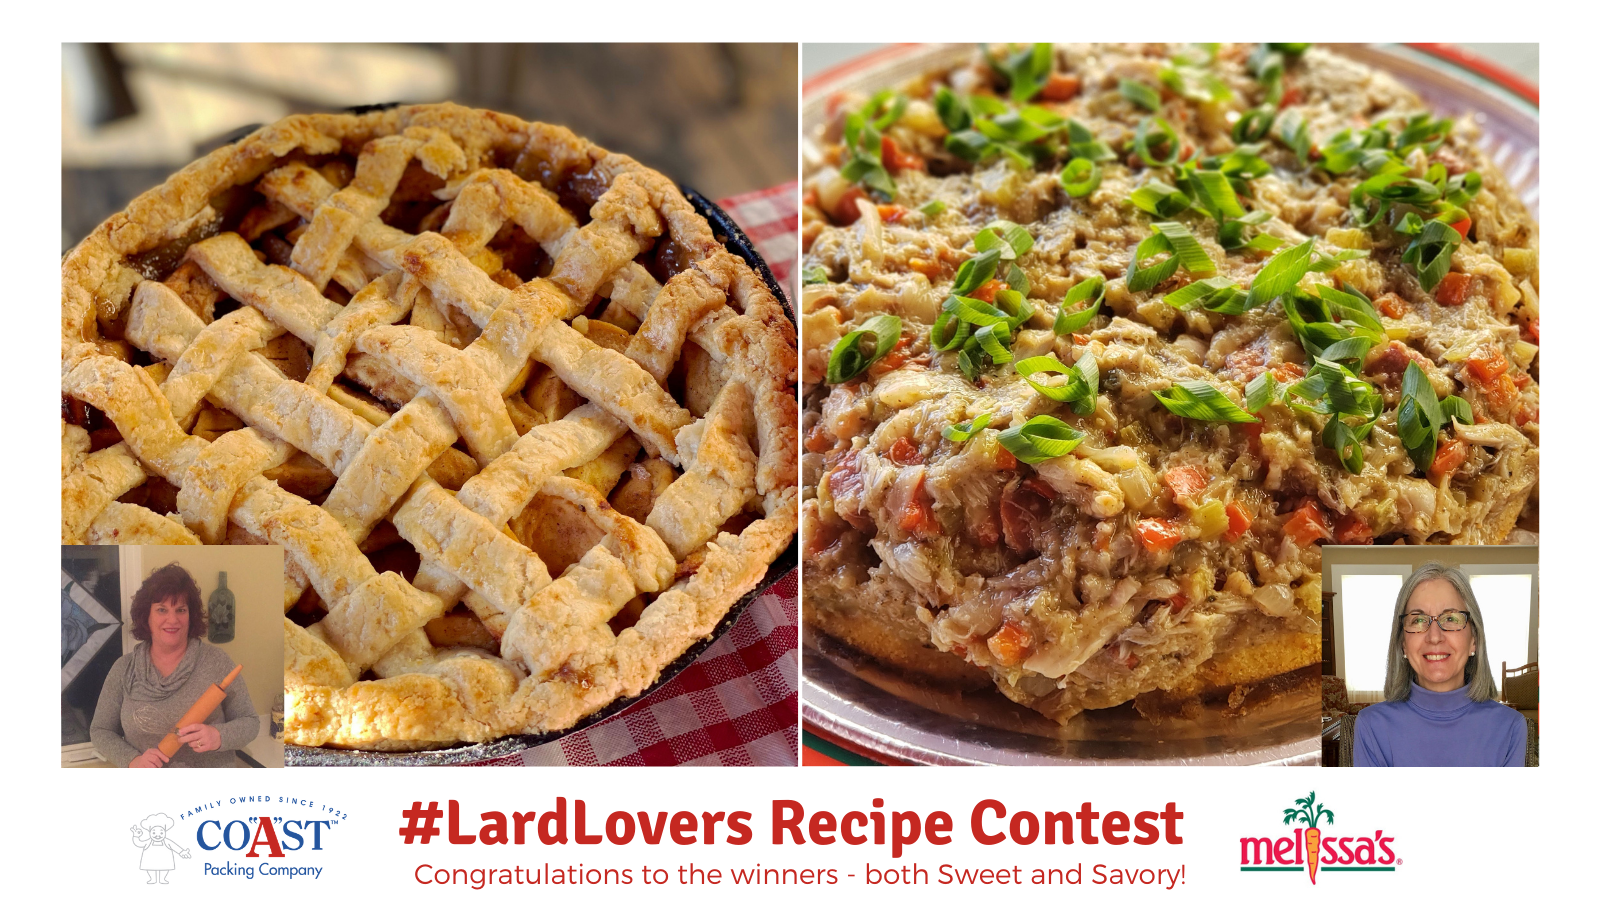 And the Coast Packing #LardLovers Recipe Contest Winners Are…  Lisa Keys from Greater Philly and Lois Spruytte of Metro Detroit